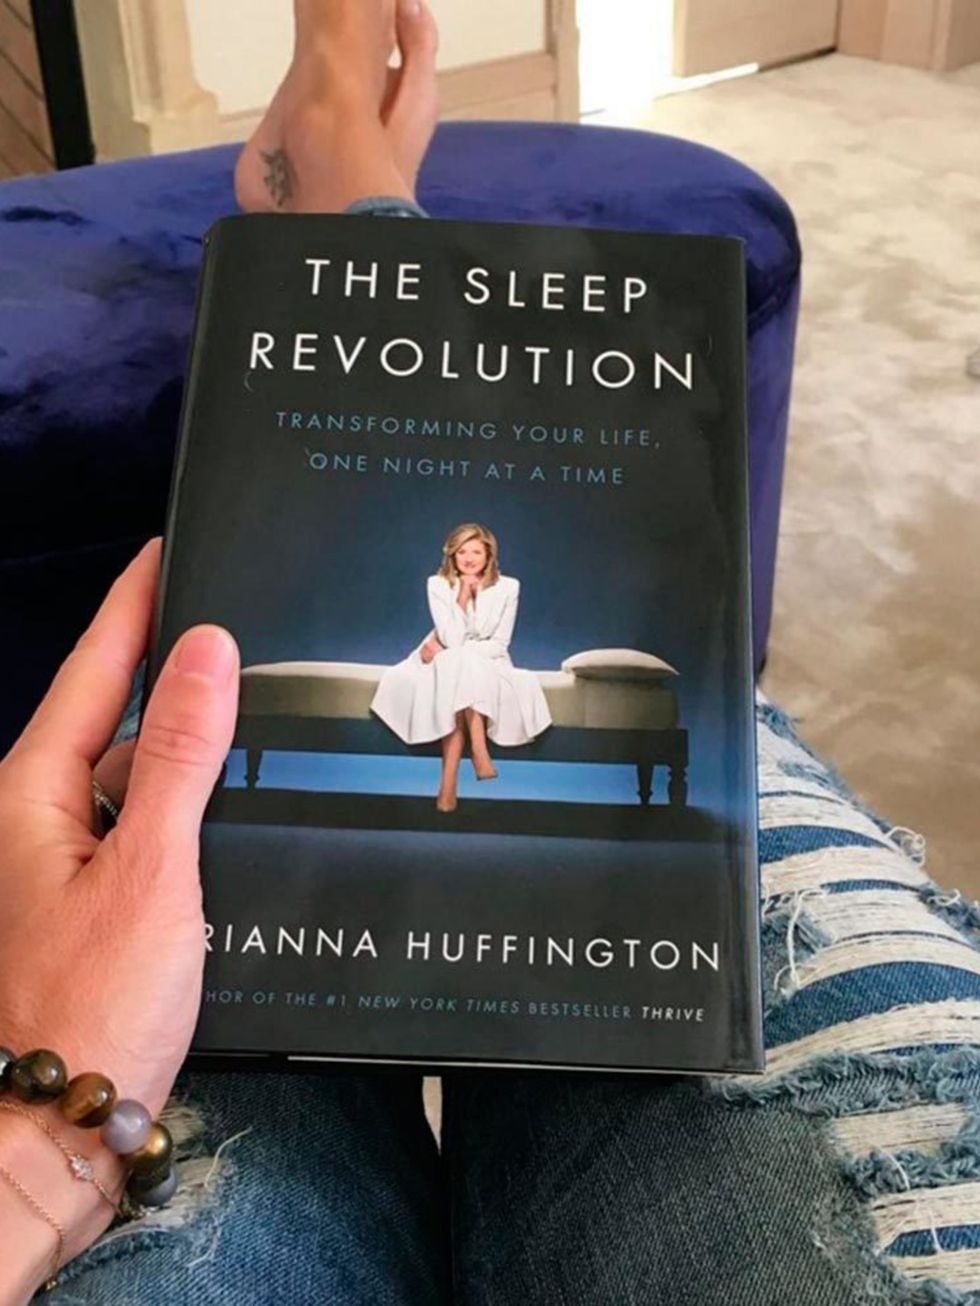 'Thank you @AriannaHuff for starting such an important conversation. #sleeprevolution #wakeupcall'